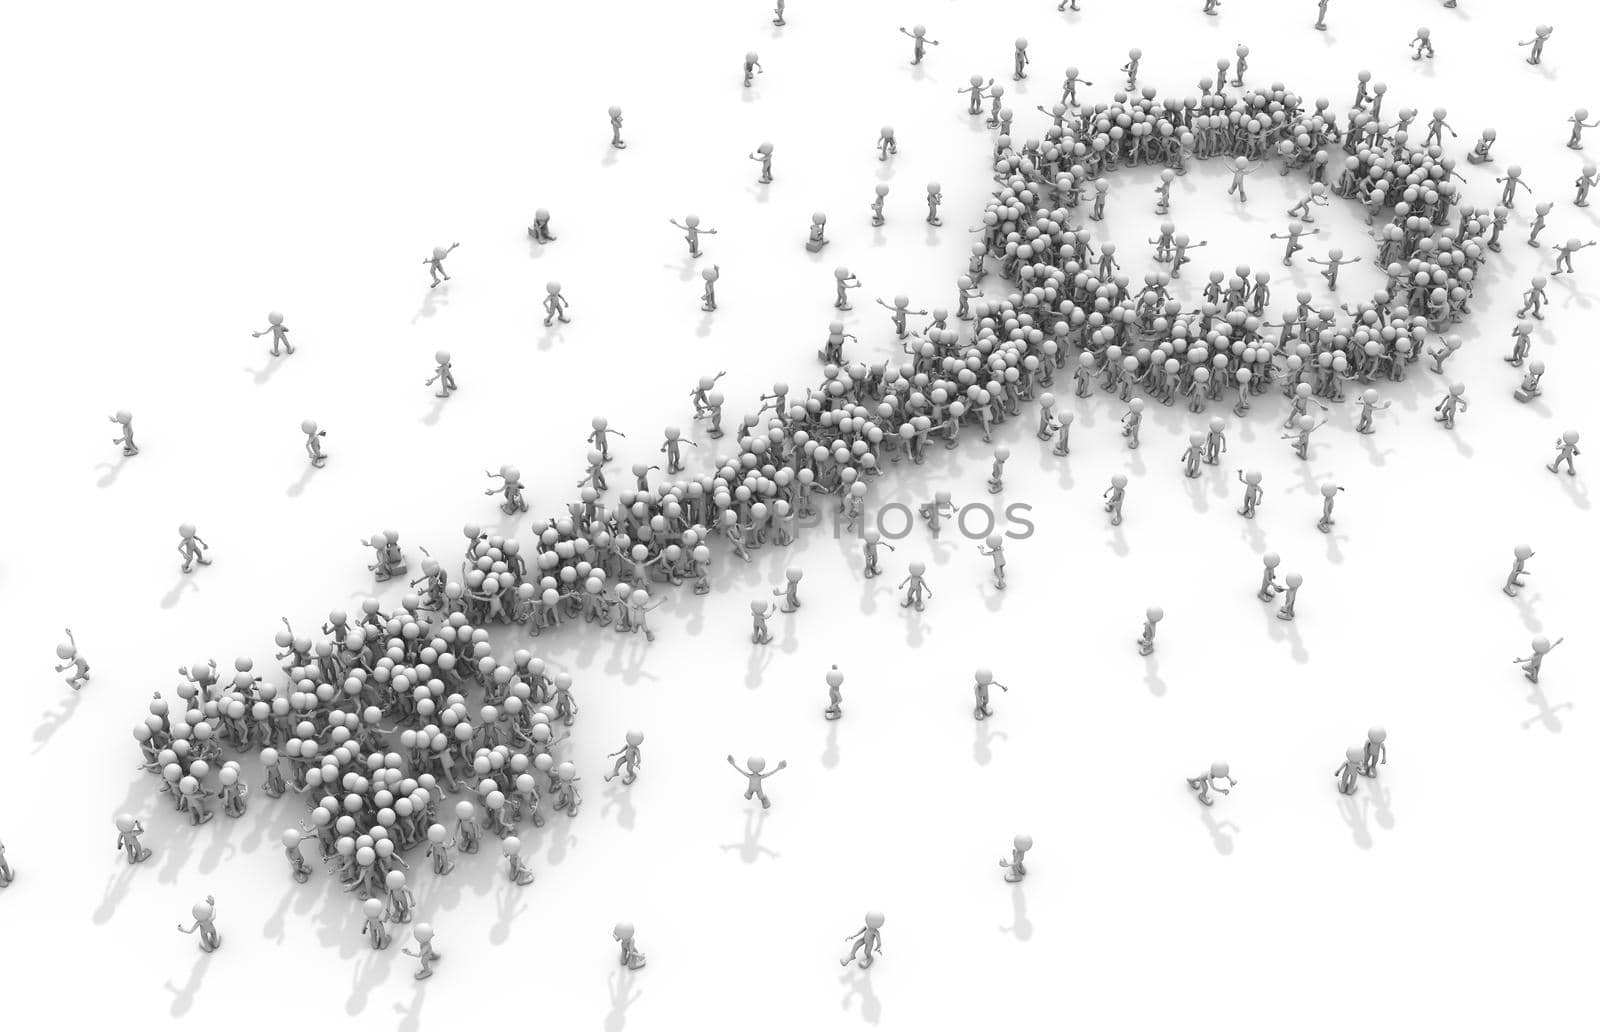 A crowd of people gathered in the form of a key for the lock. 3d render